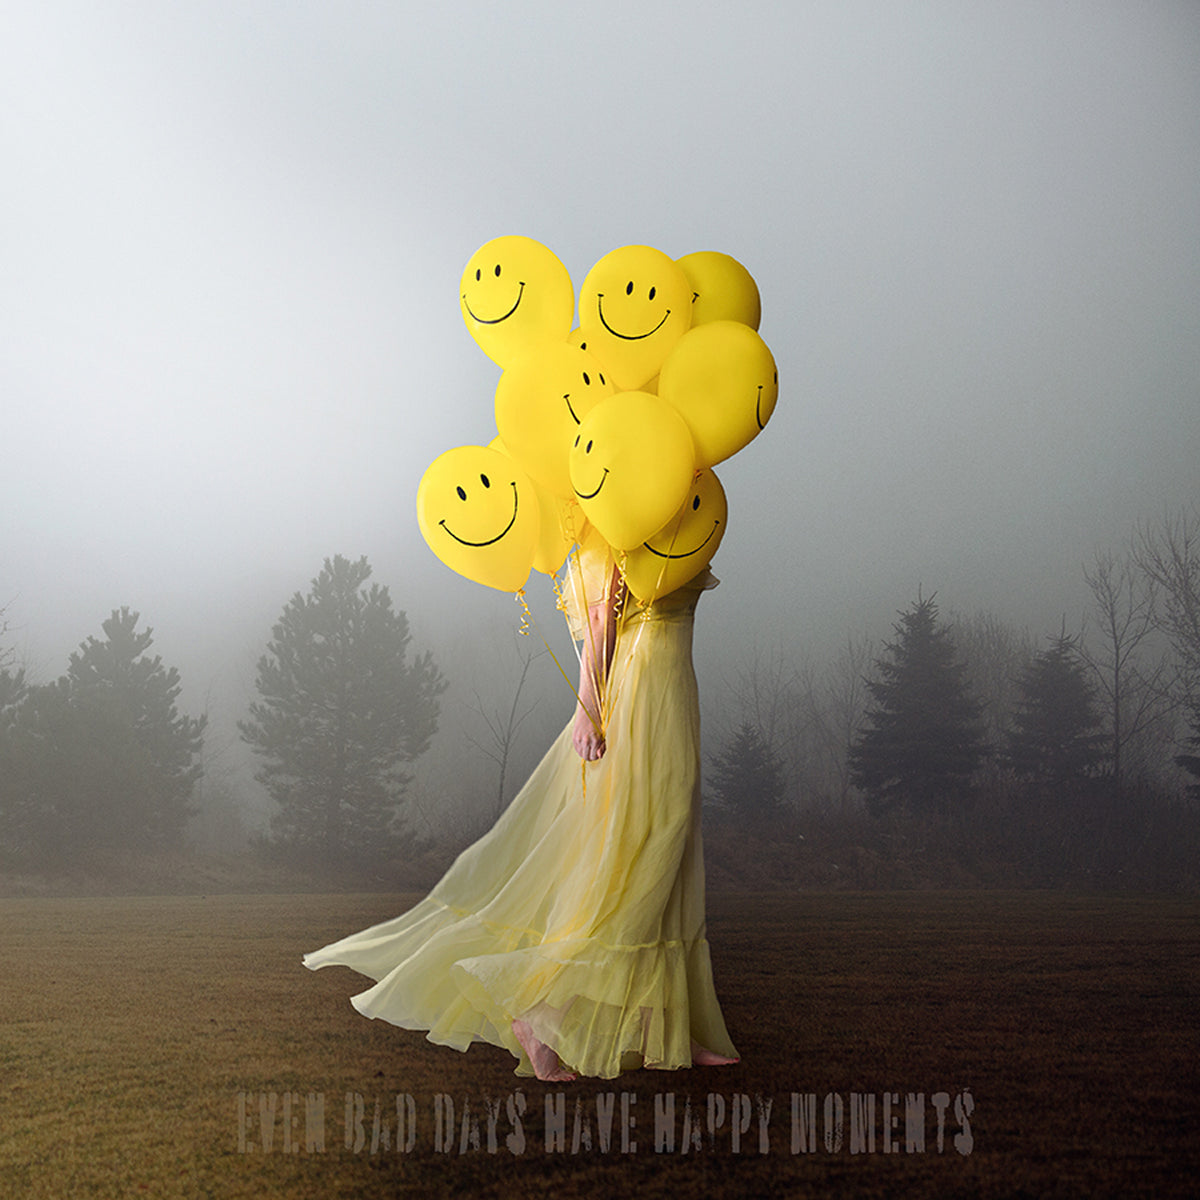 Lora Moore - Even Bad Days Have Happy Endings, 15" x 15"